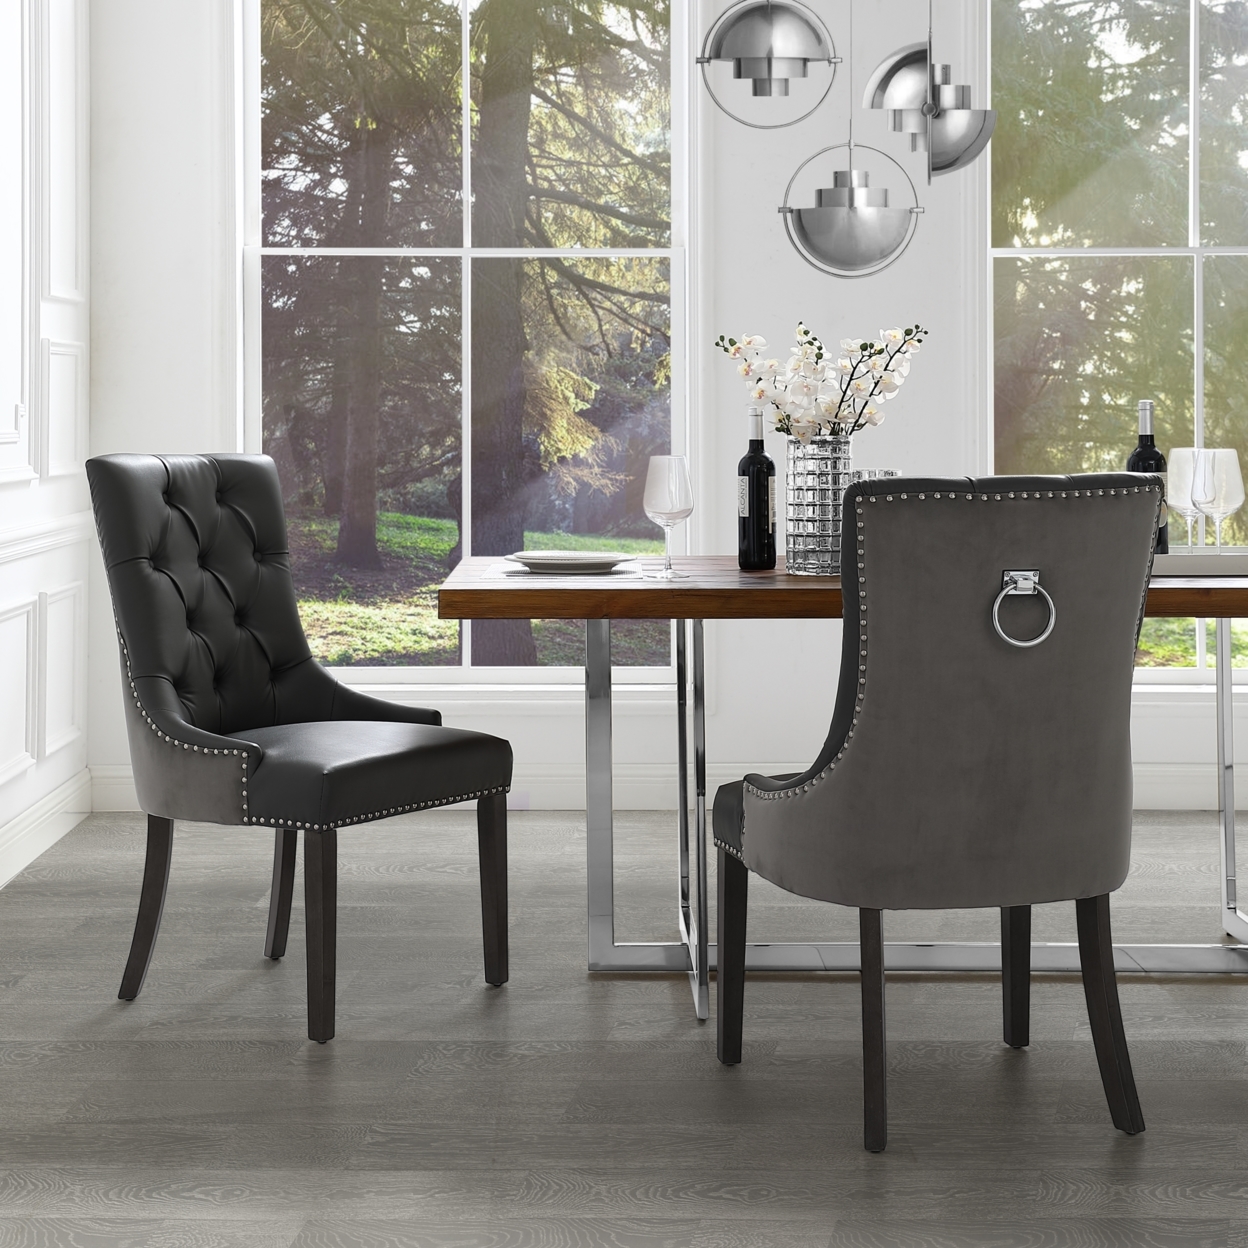 Harry Leather PU - Velvet Dining Chair-Set Of 2-Tufted-Ring Handle-Nailhead Trim By Inspired Home - Dark Grey Leather / Velvet